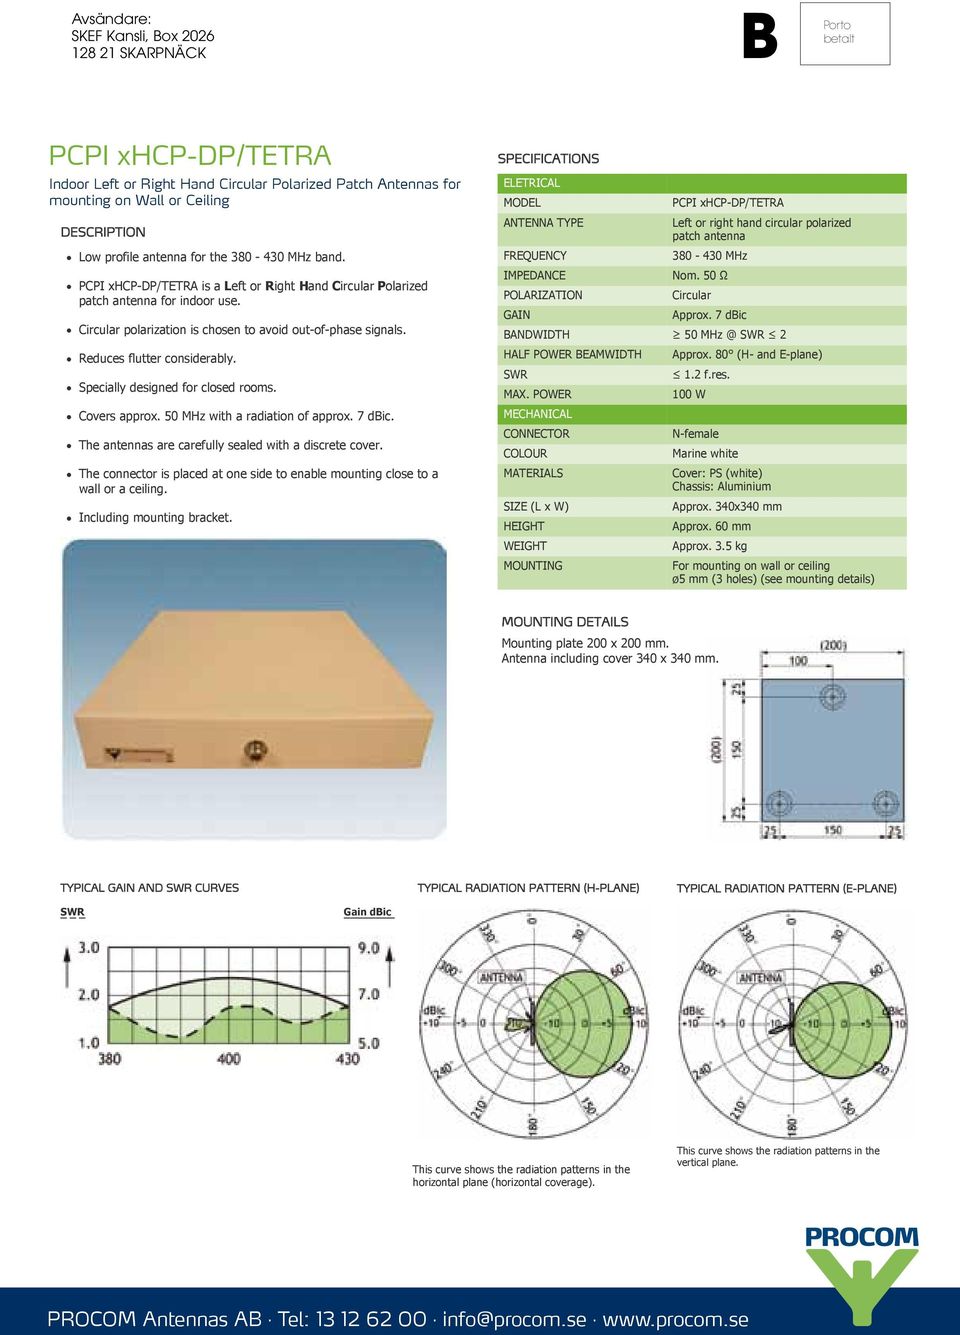 Reduces flutter considerably. Specially designed for closed rooms. Covers approx. 50 MHz with a radiation of approx. 7 dbic. The antennas are carefully sealed with a discrete cover.